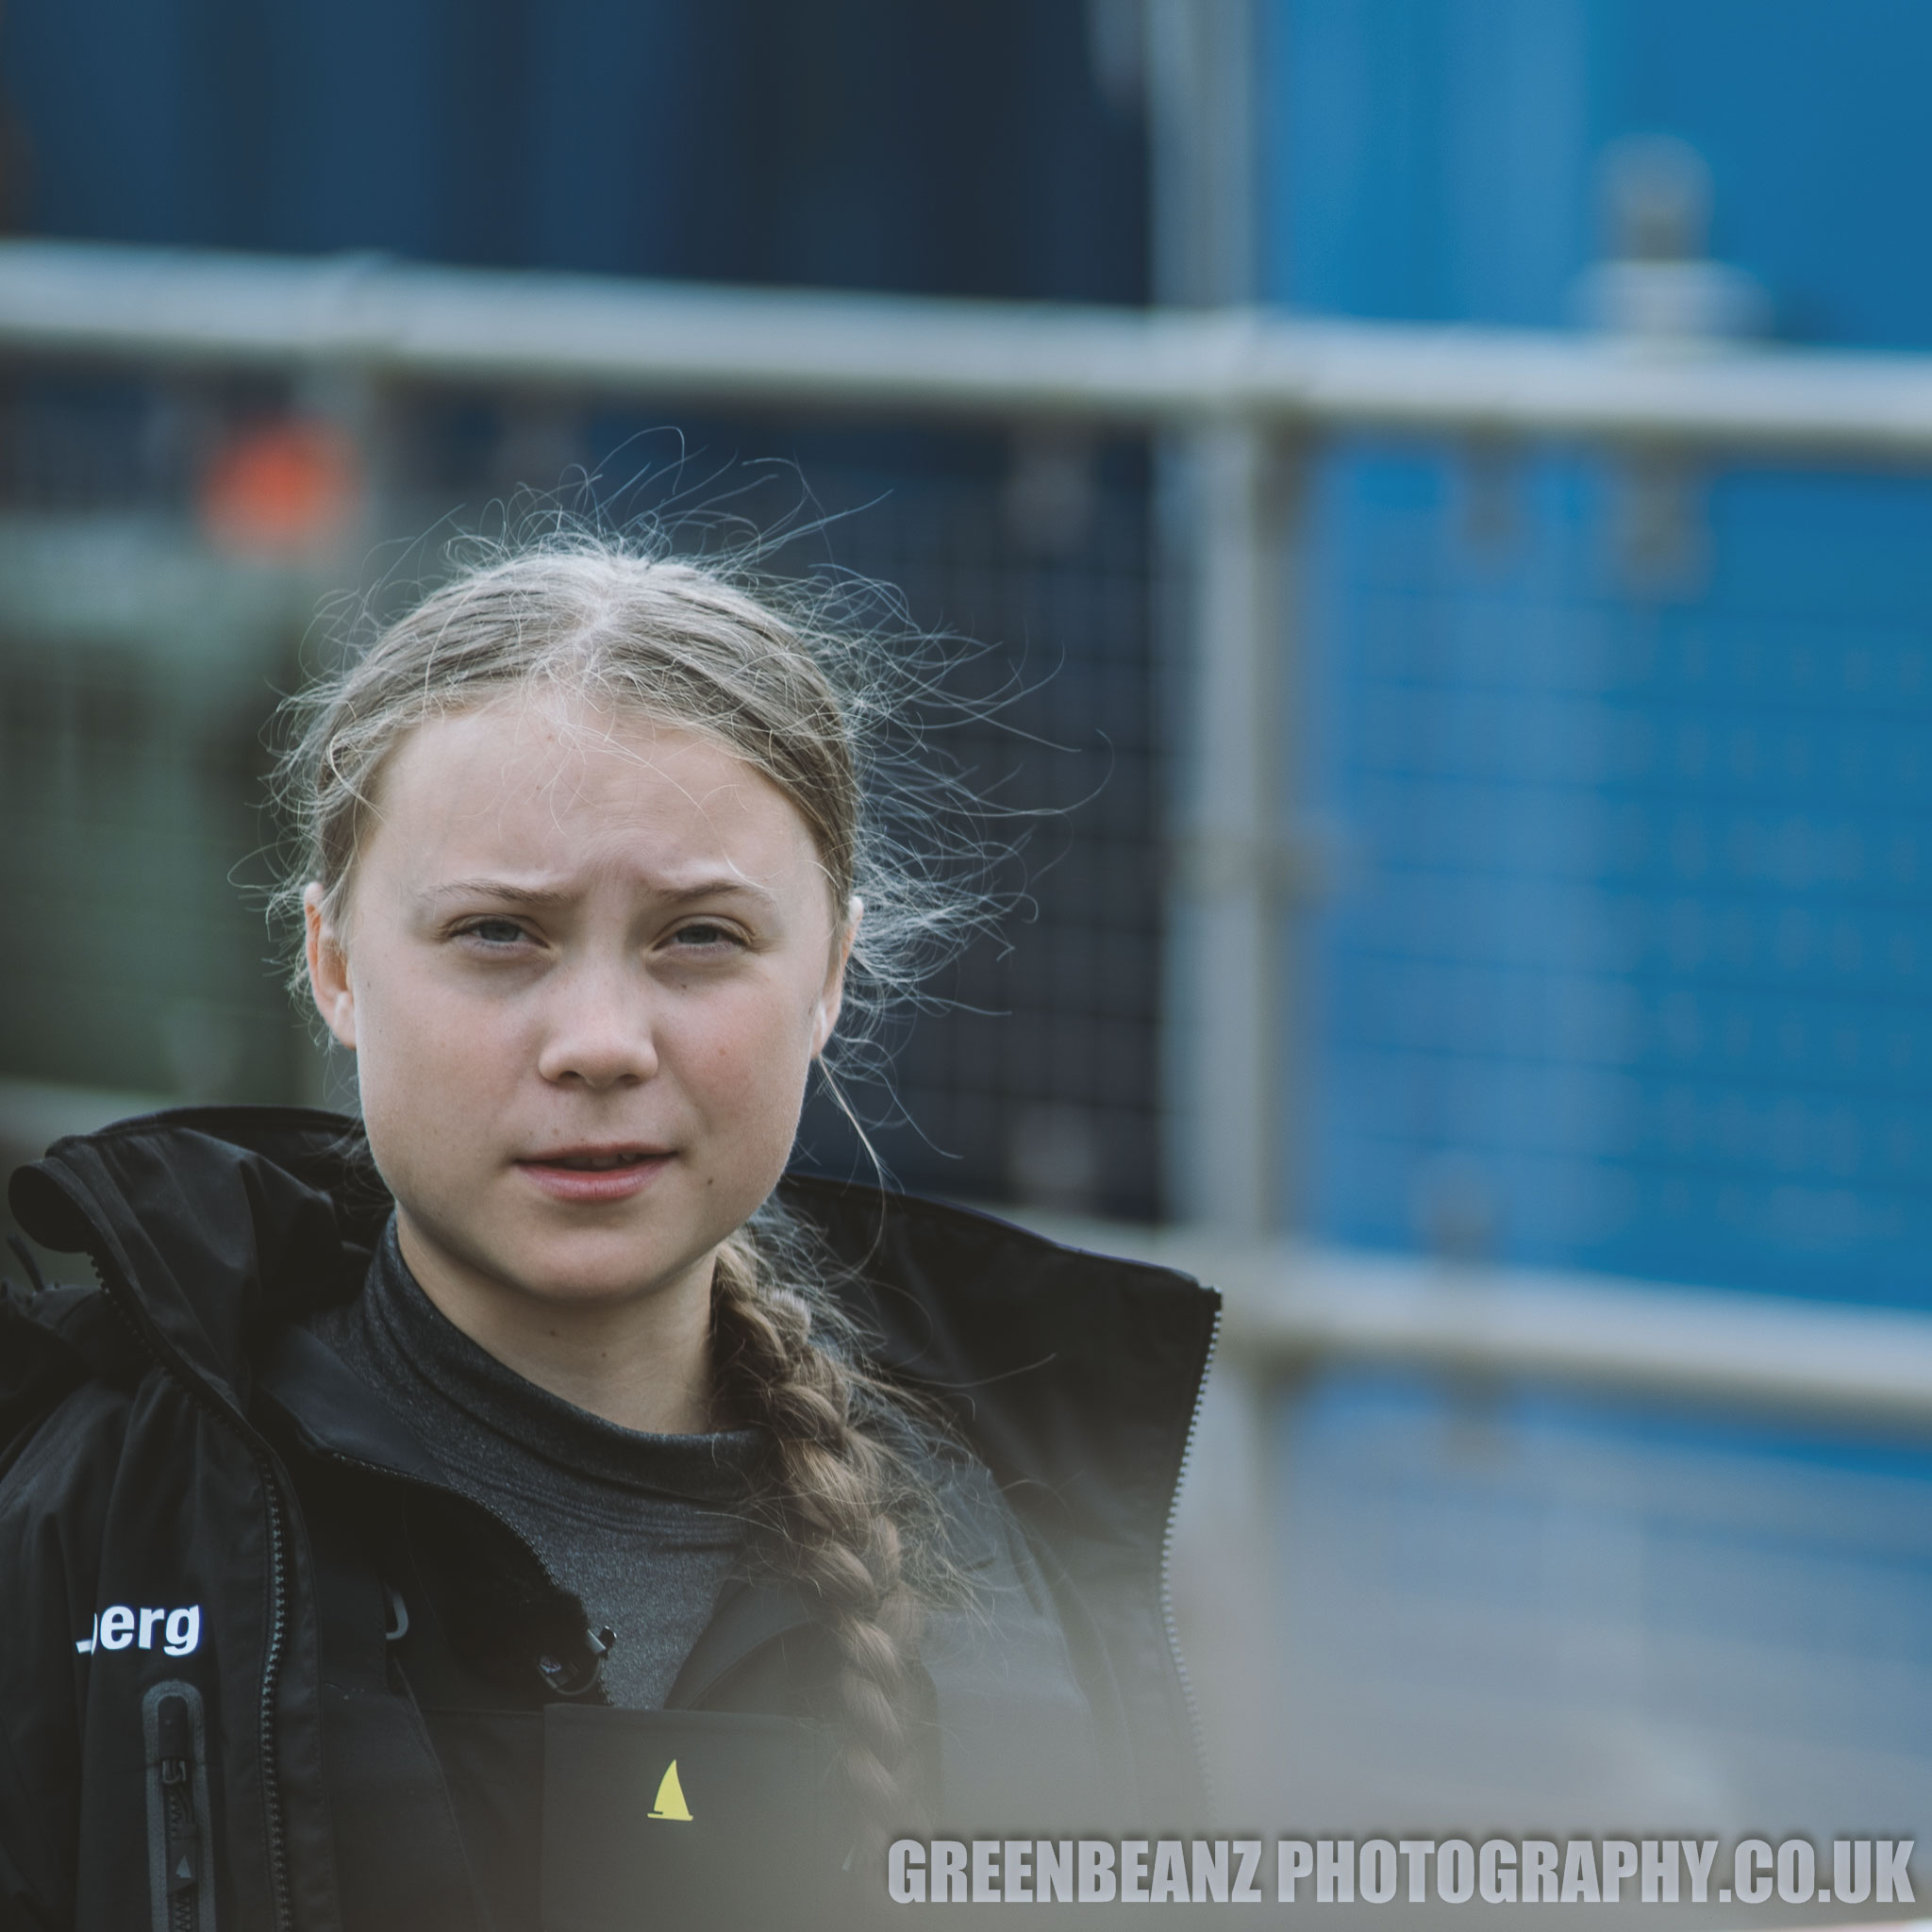 Greta Thunberg in Plymouth UK before leaving for UN Climate Change Summit